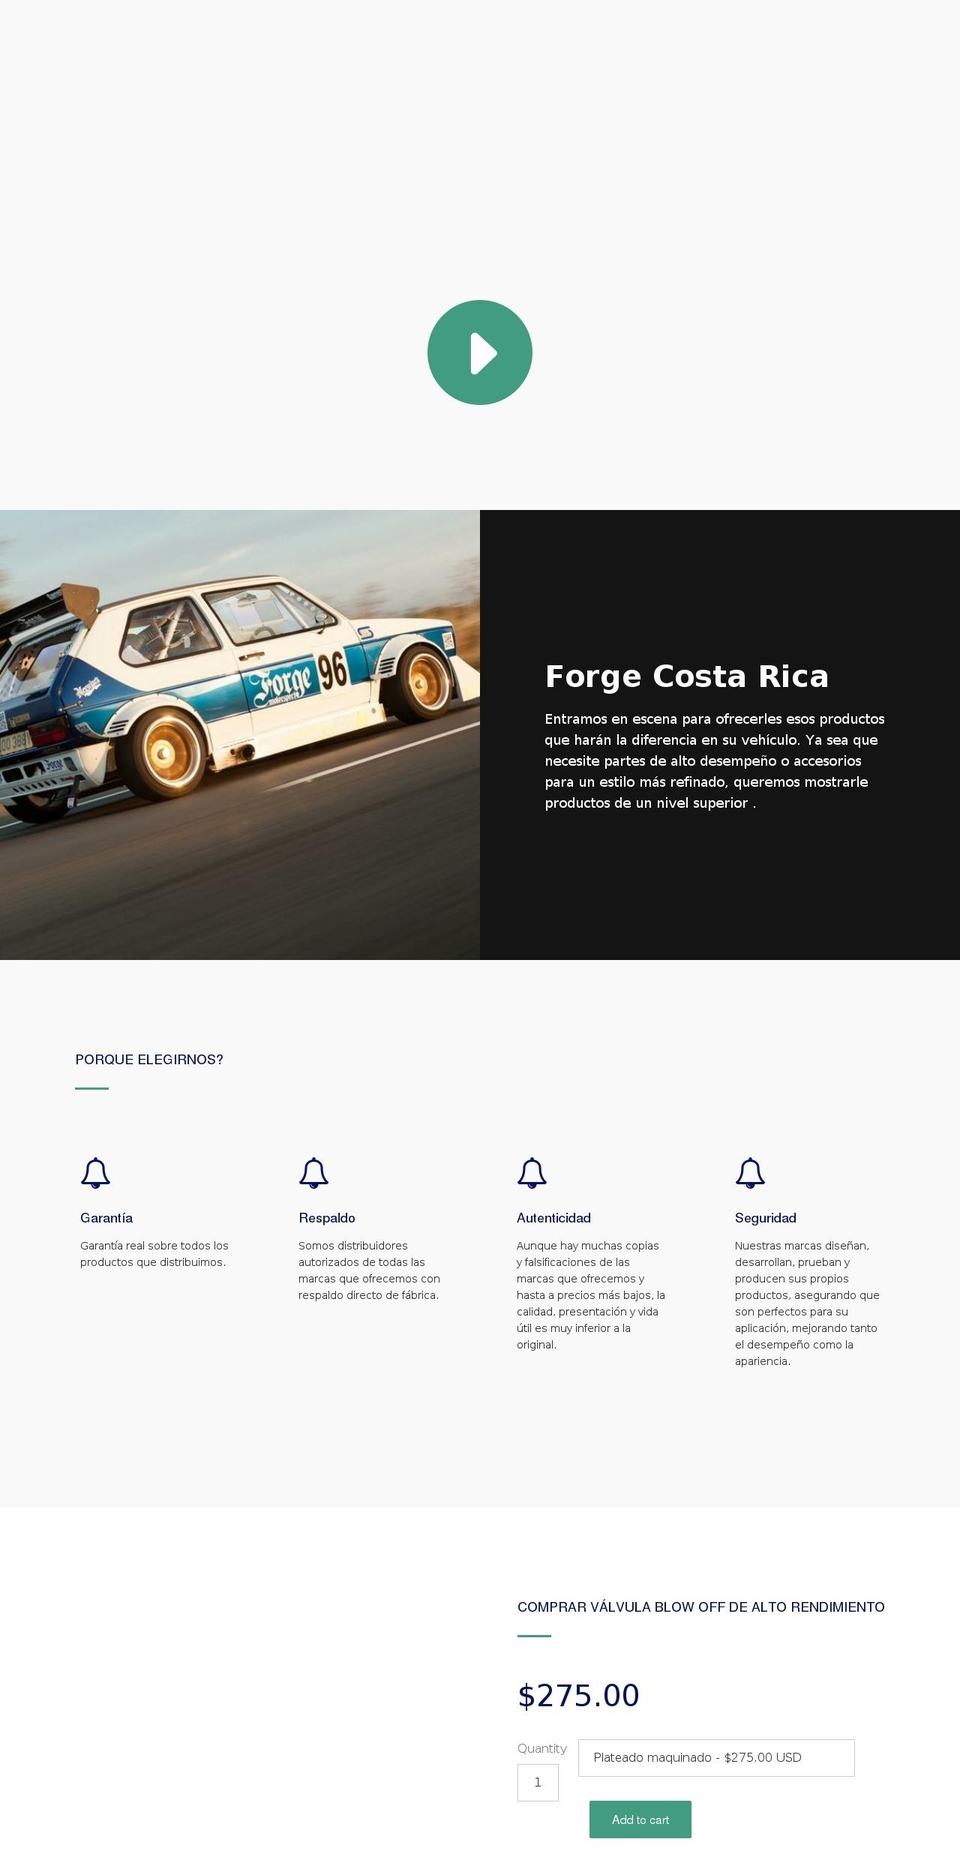 Forge Shopify theme site example forgecostarica.com